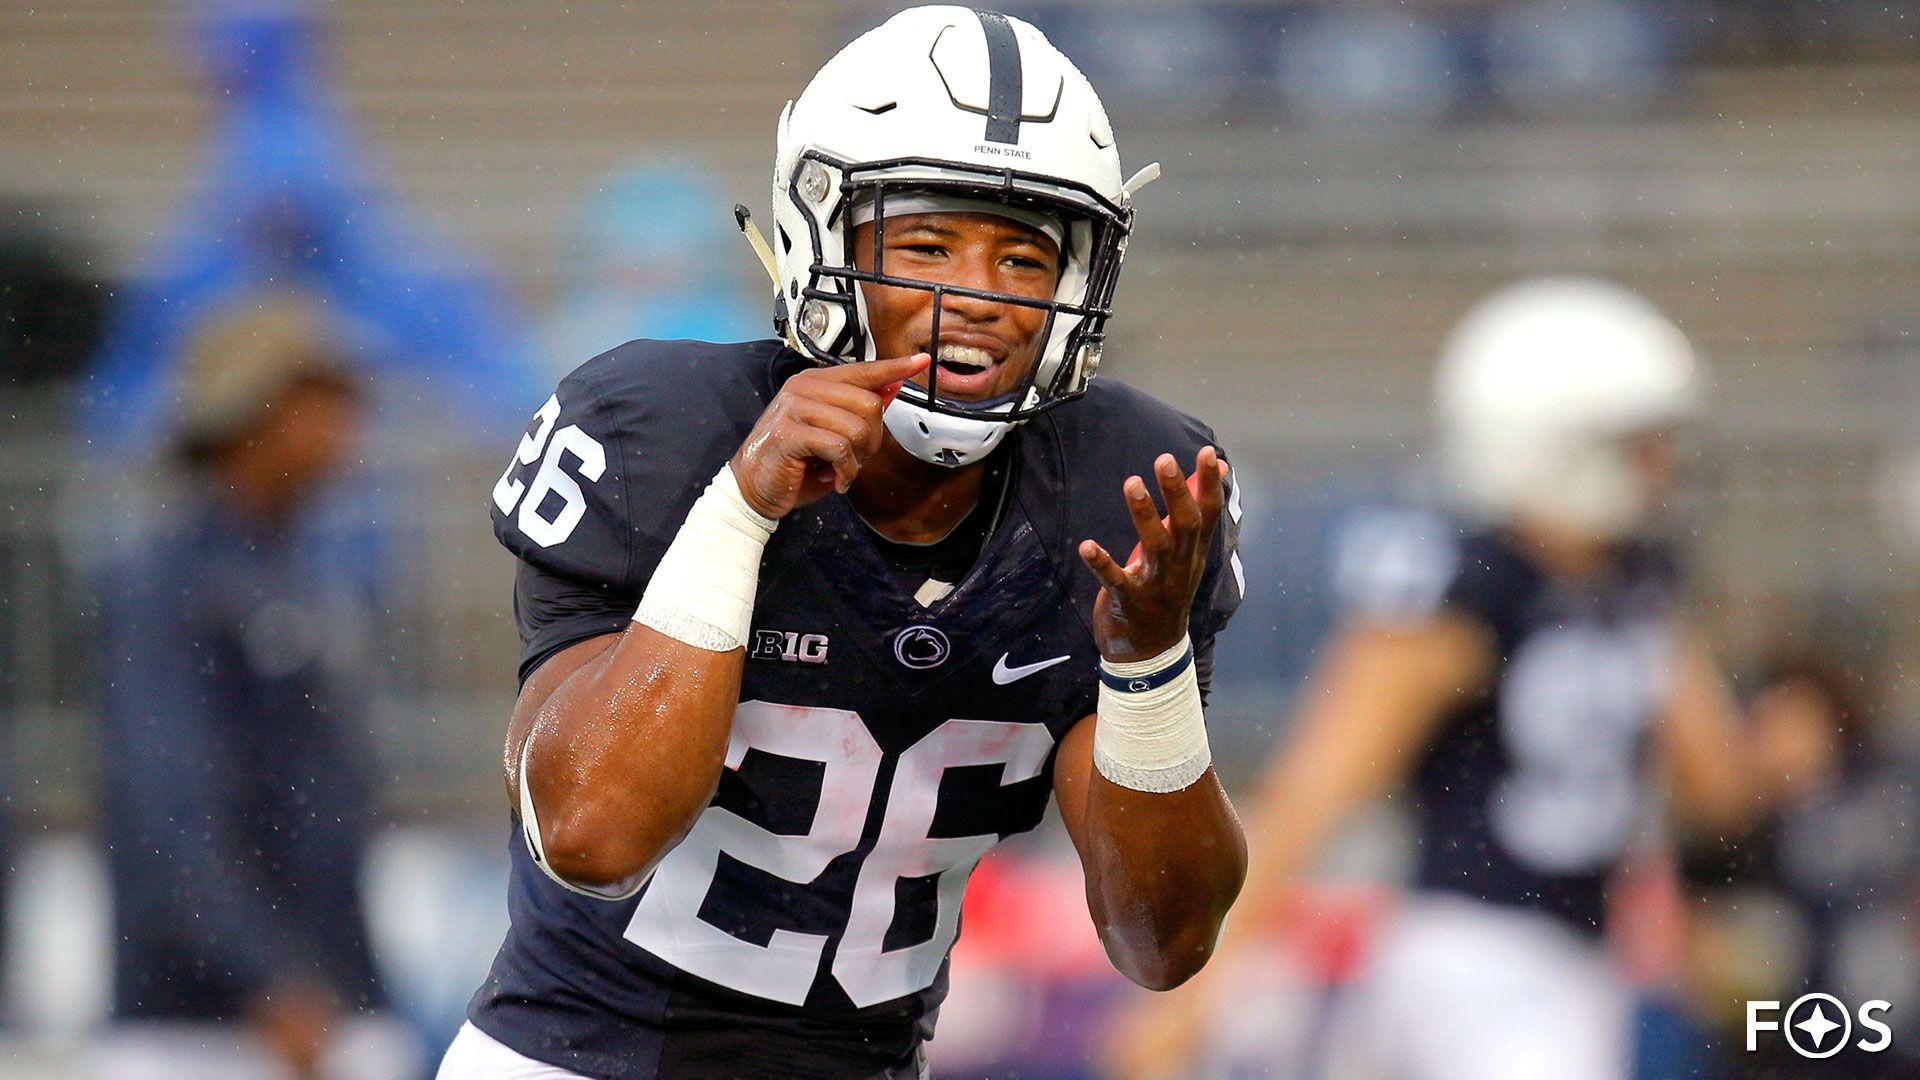 Scouting Penn State Rookie RB Saquon Barkley